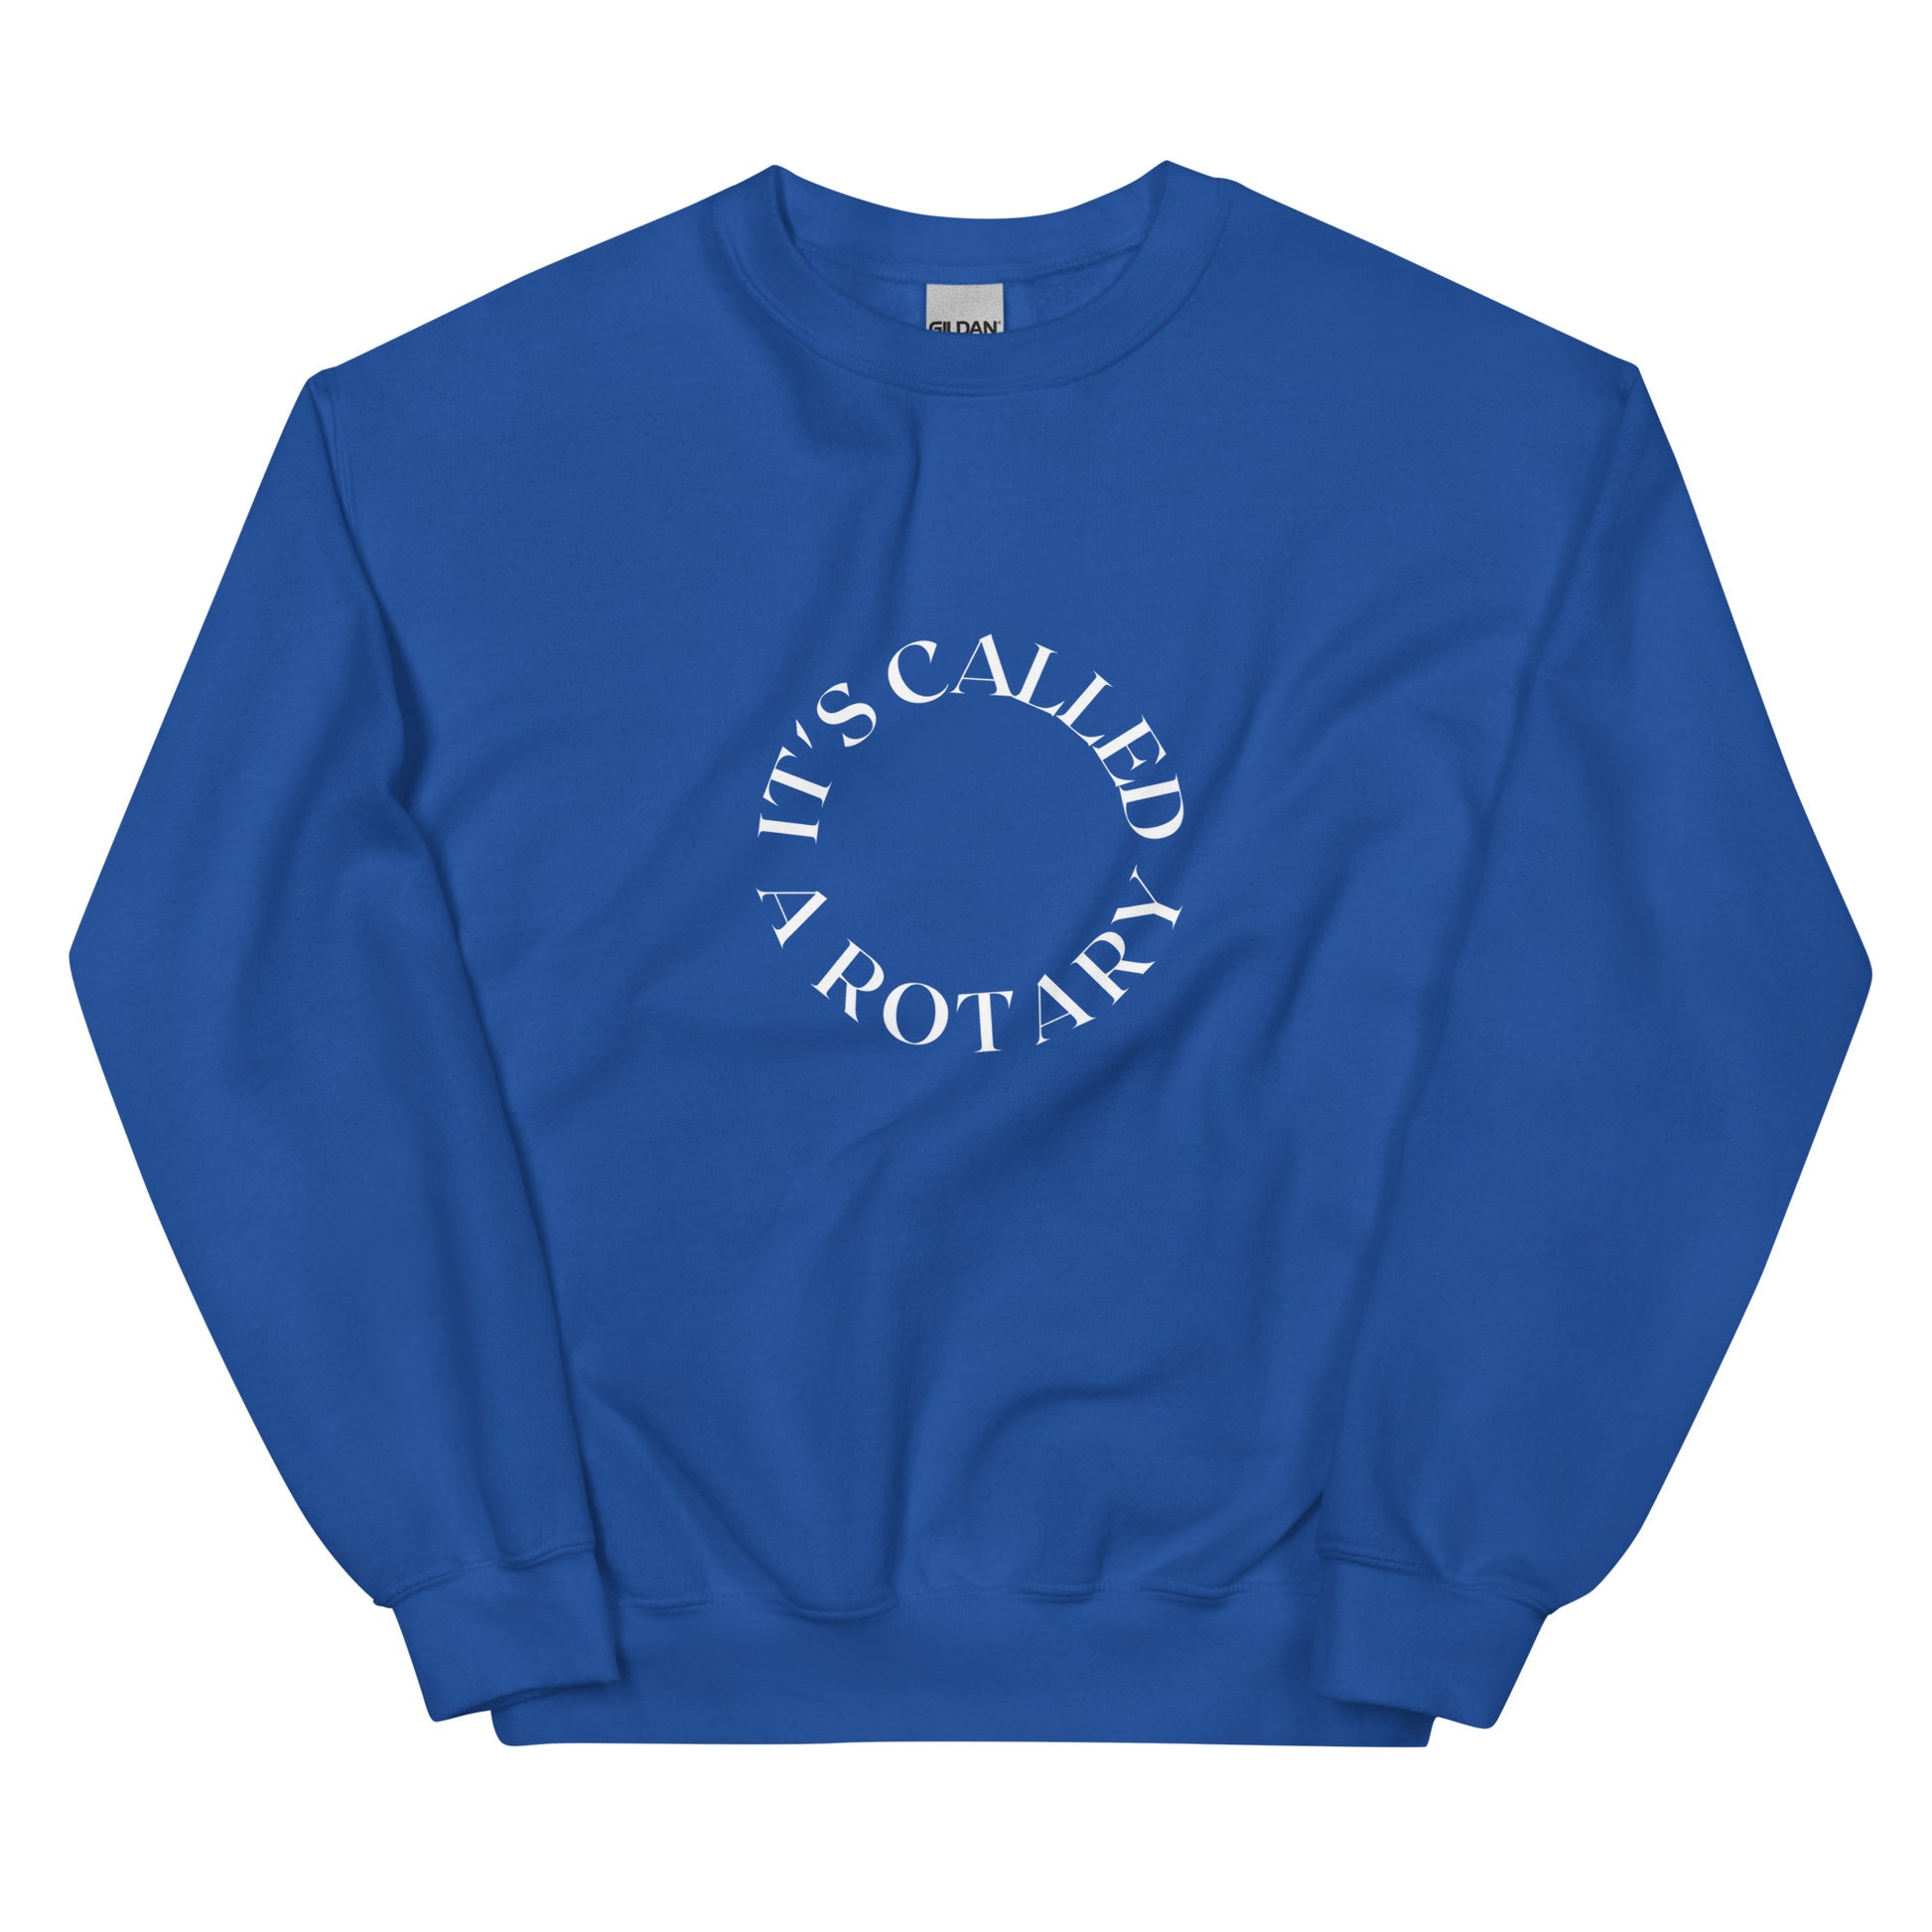 blue crewneck that says "it's called a rotary" in white lettering shaped in a circle